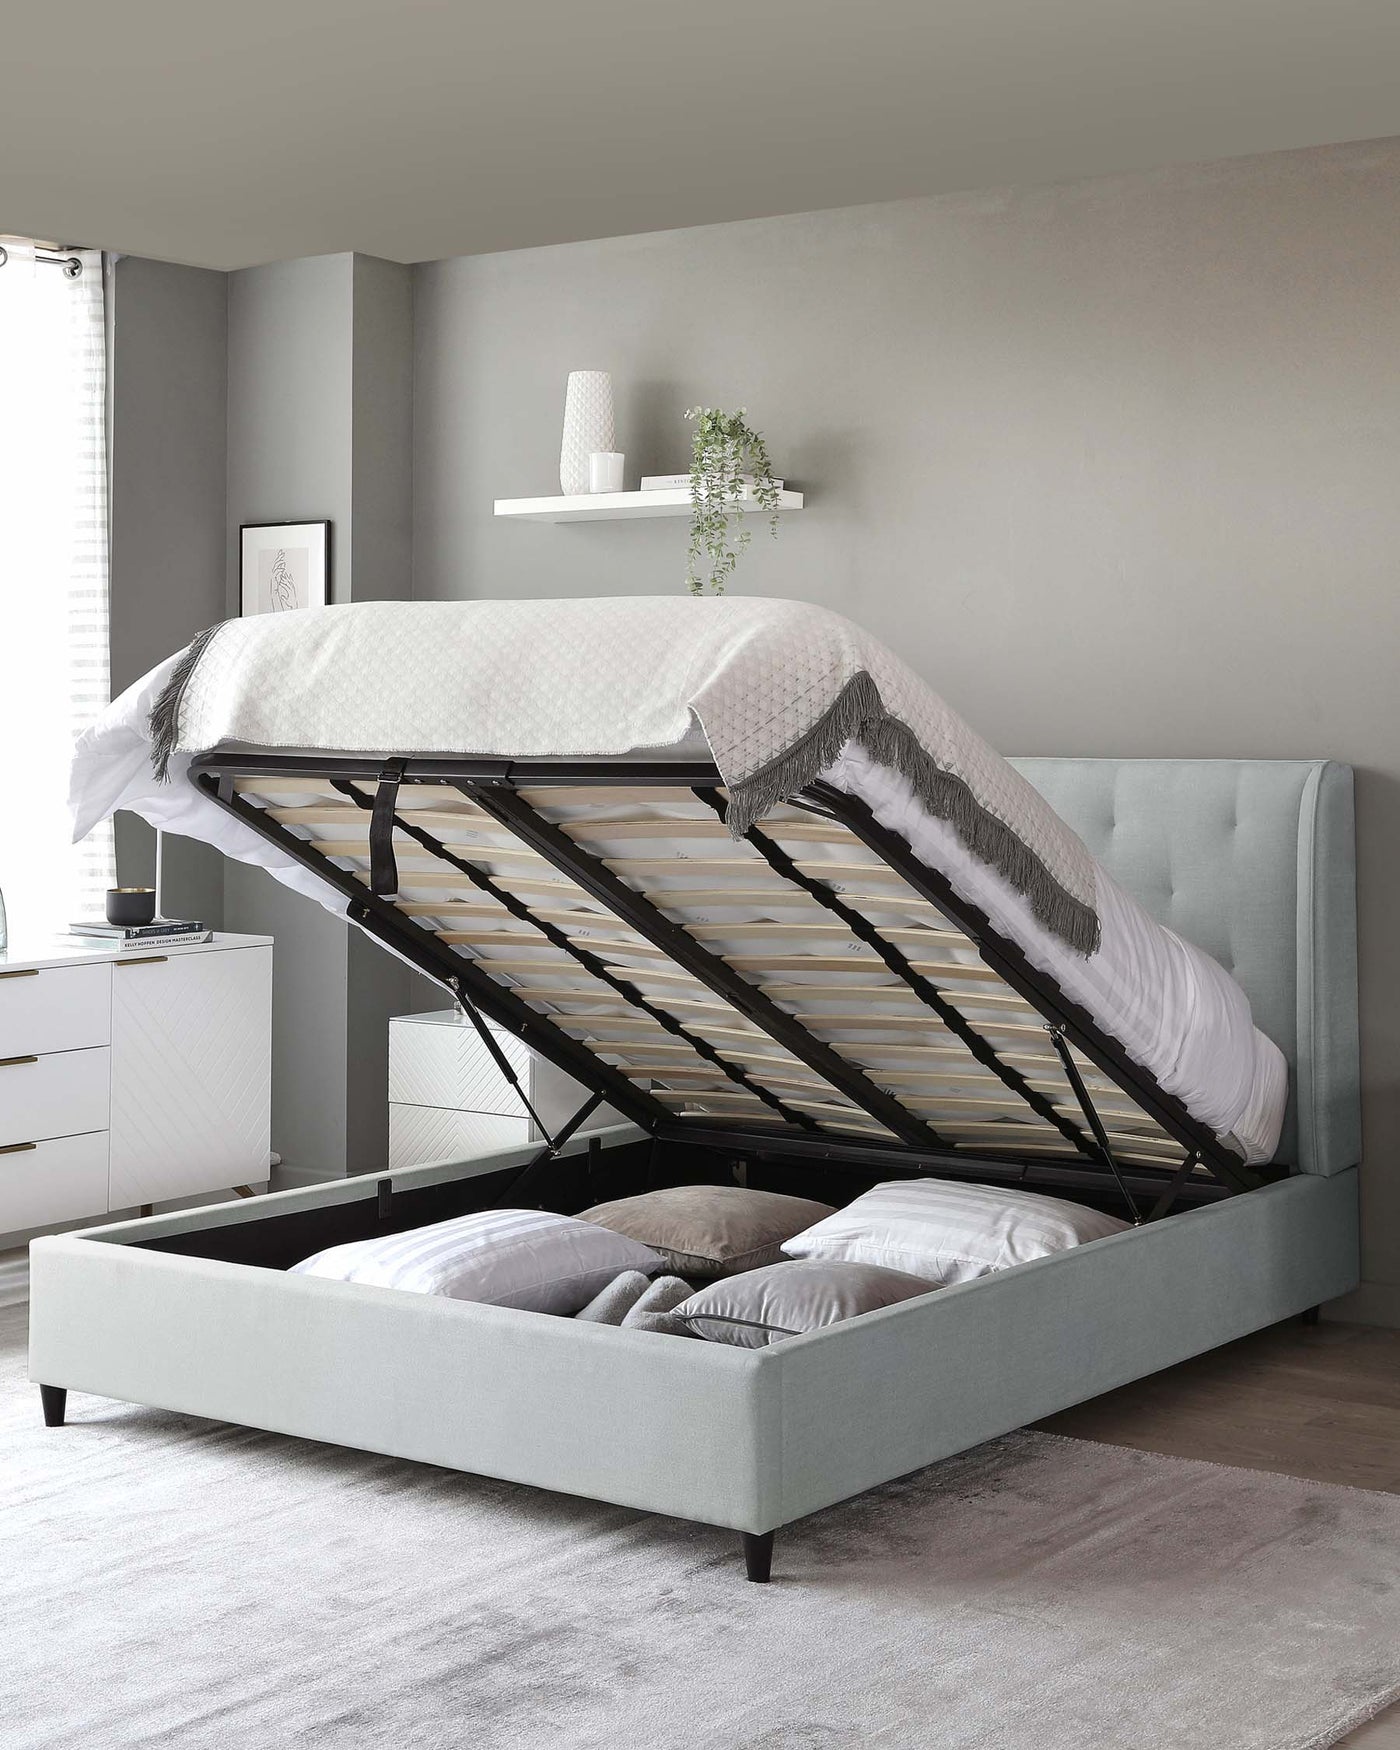 A modern light grey upholstered storage bed with its mattress lifted to reveal a spacious storage compartment underneath. The bed features a tufted headboard and is set on dark wooden legs. A matching light grey nightstand with white drawer fronts is visible to the left of the bed.